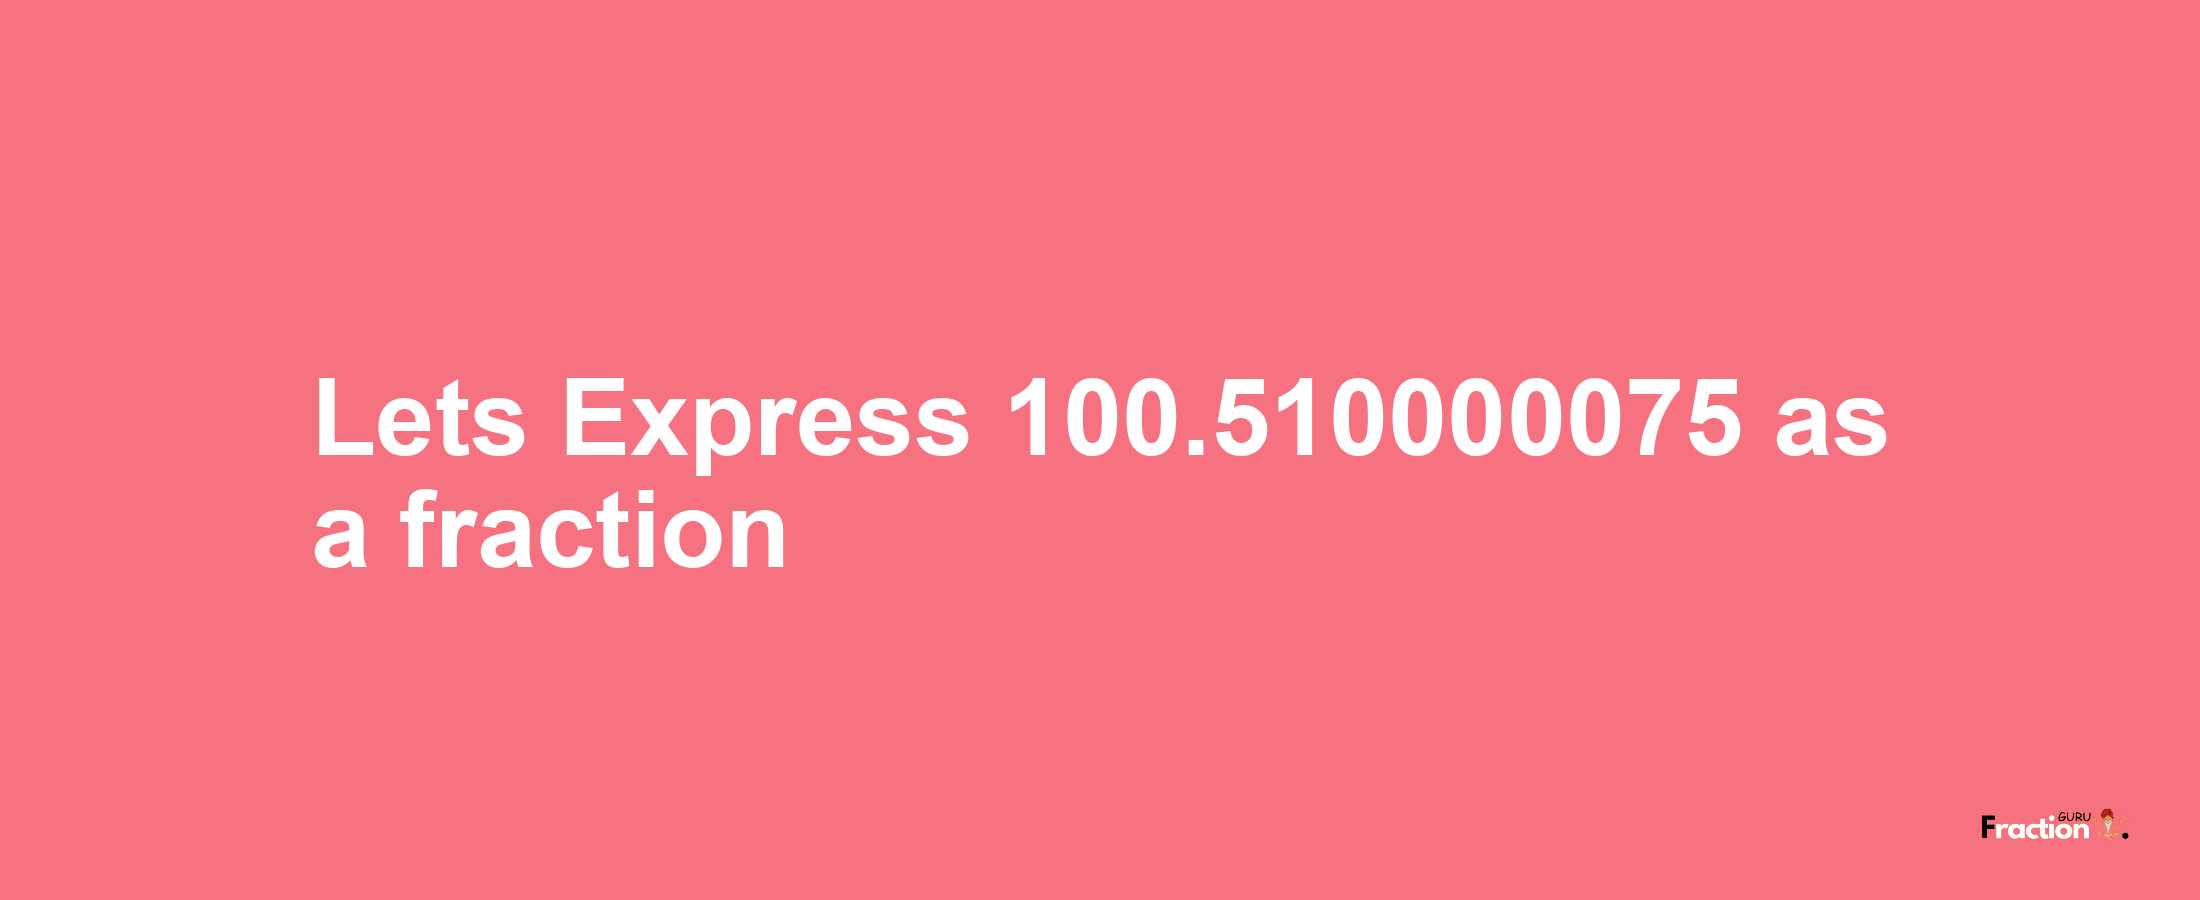 Lets Express 100.510000075 as afraction